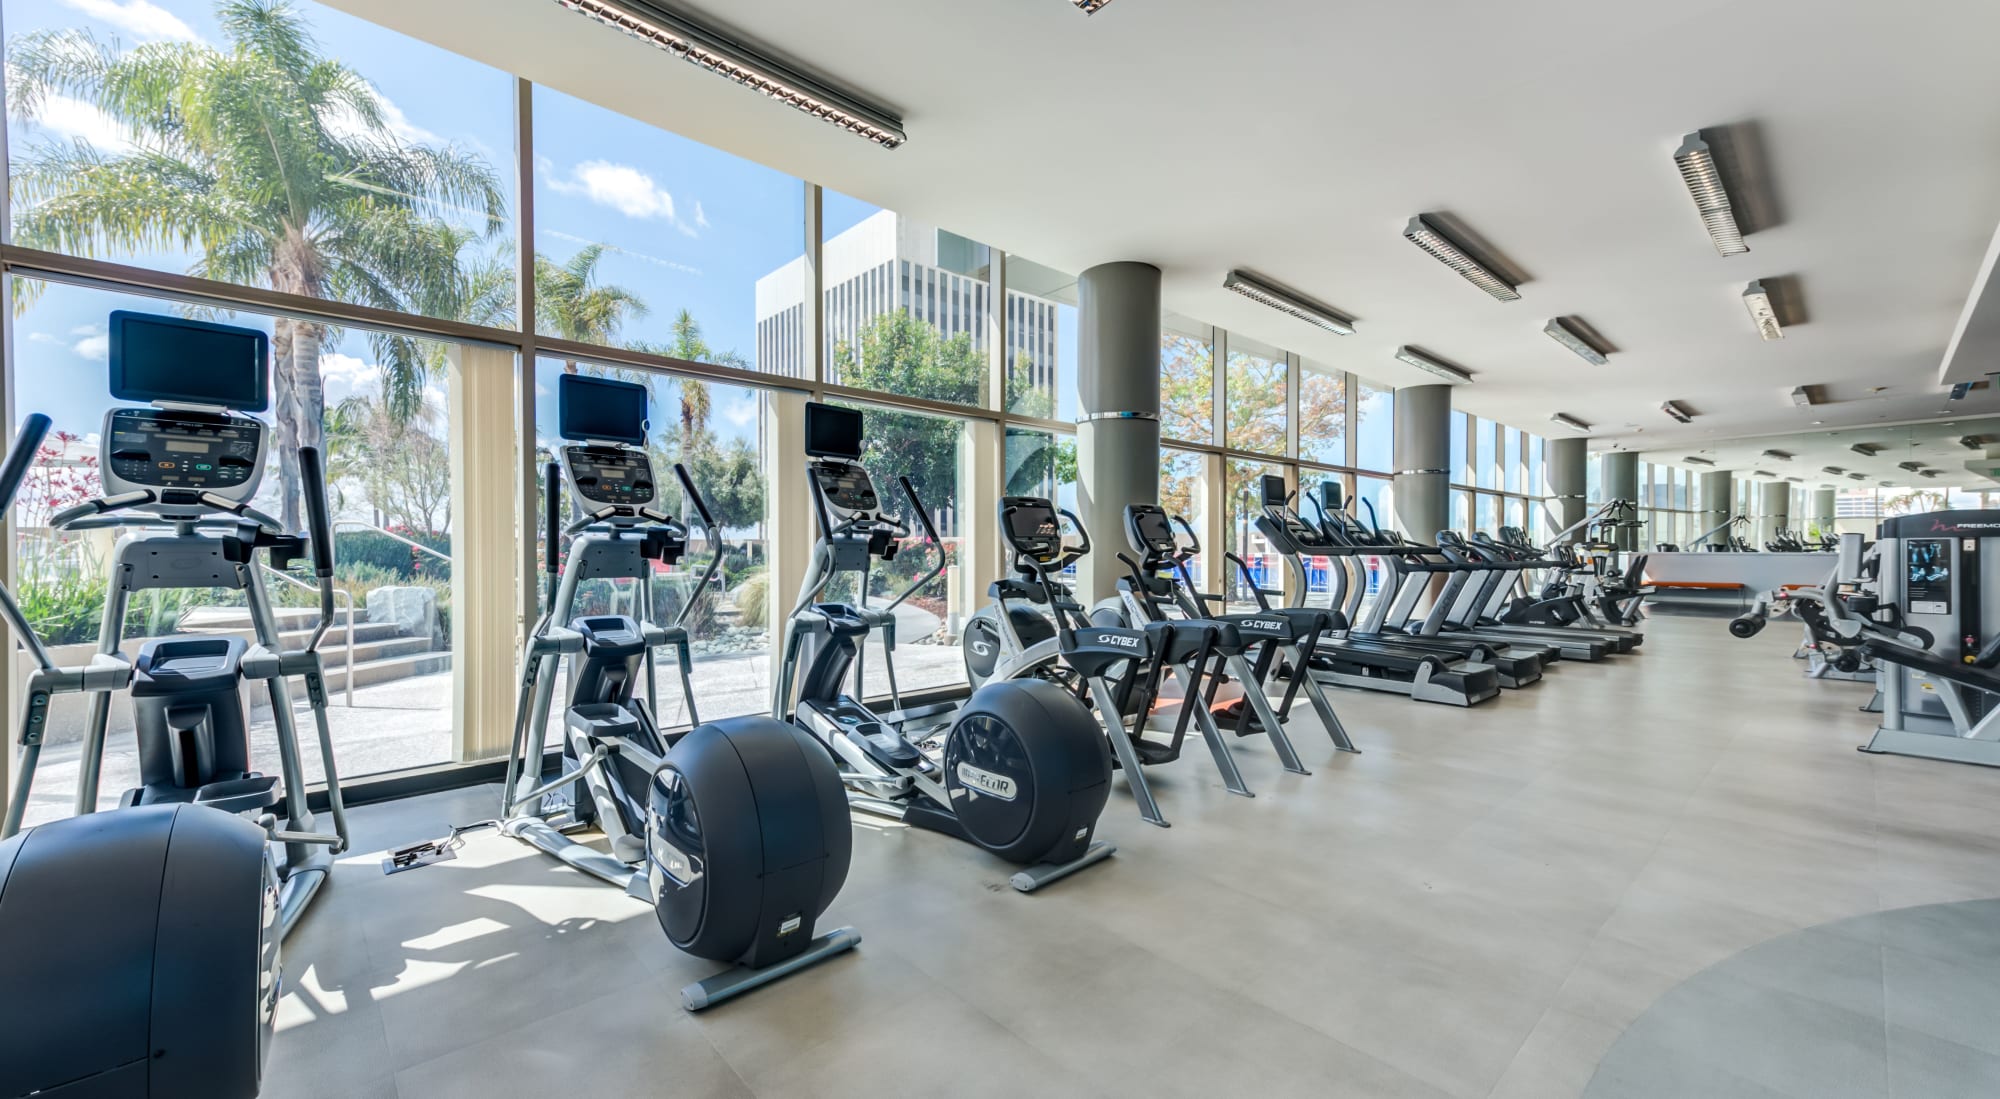 State-of-the-art HarborFit fitness center at The Vermont in Los Angeles, California